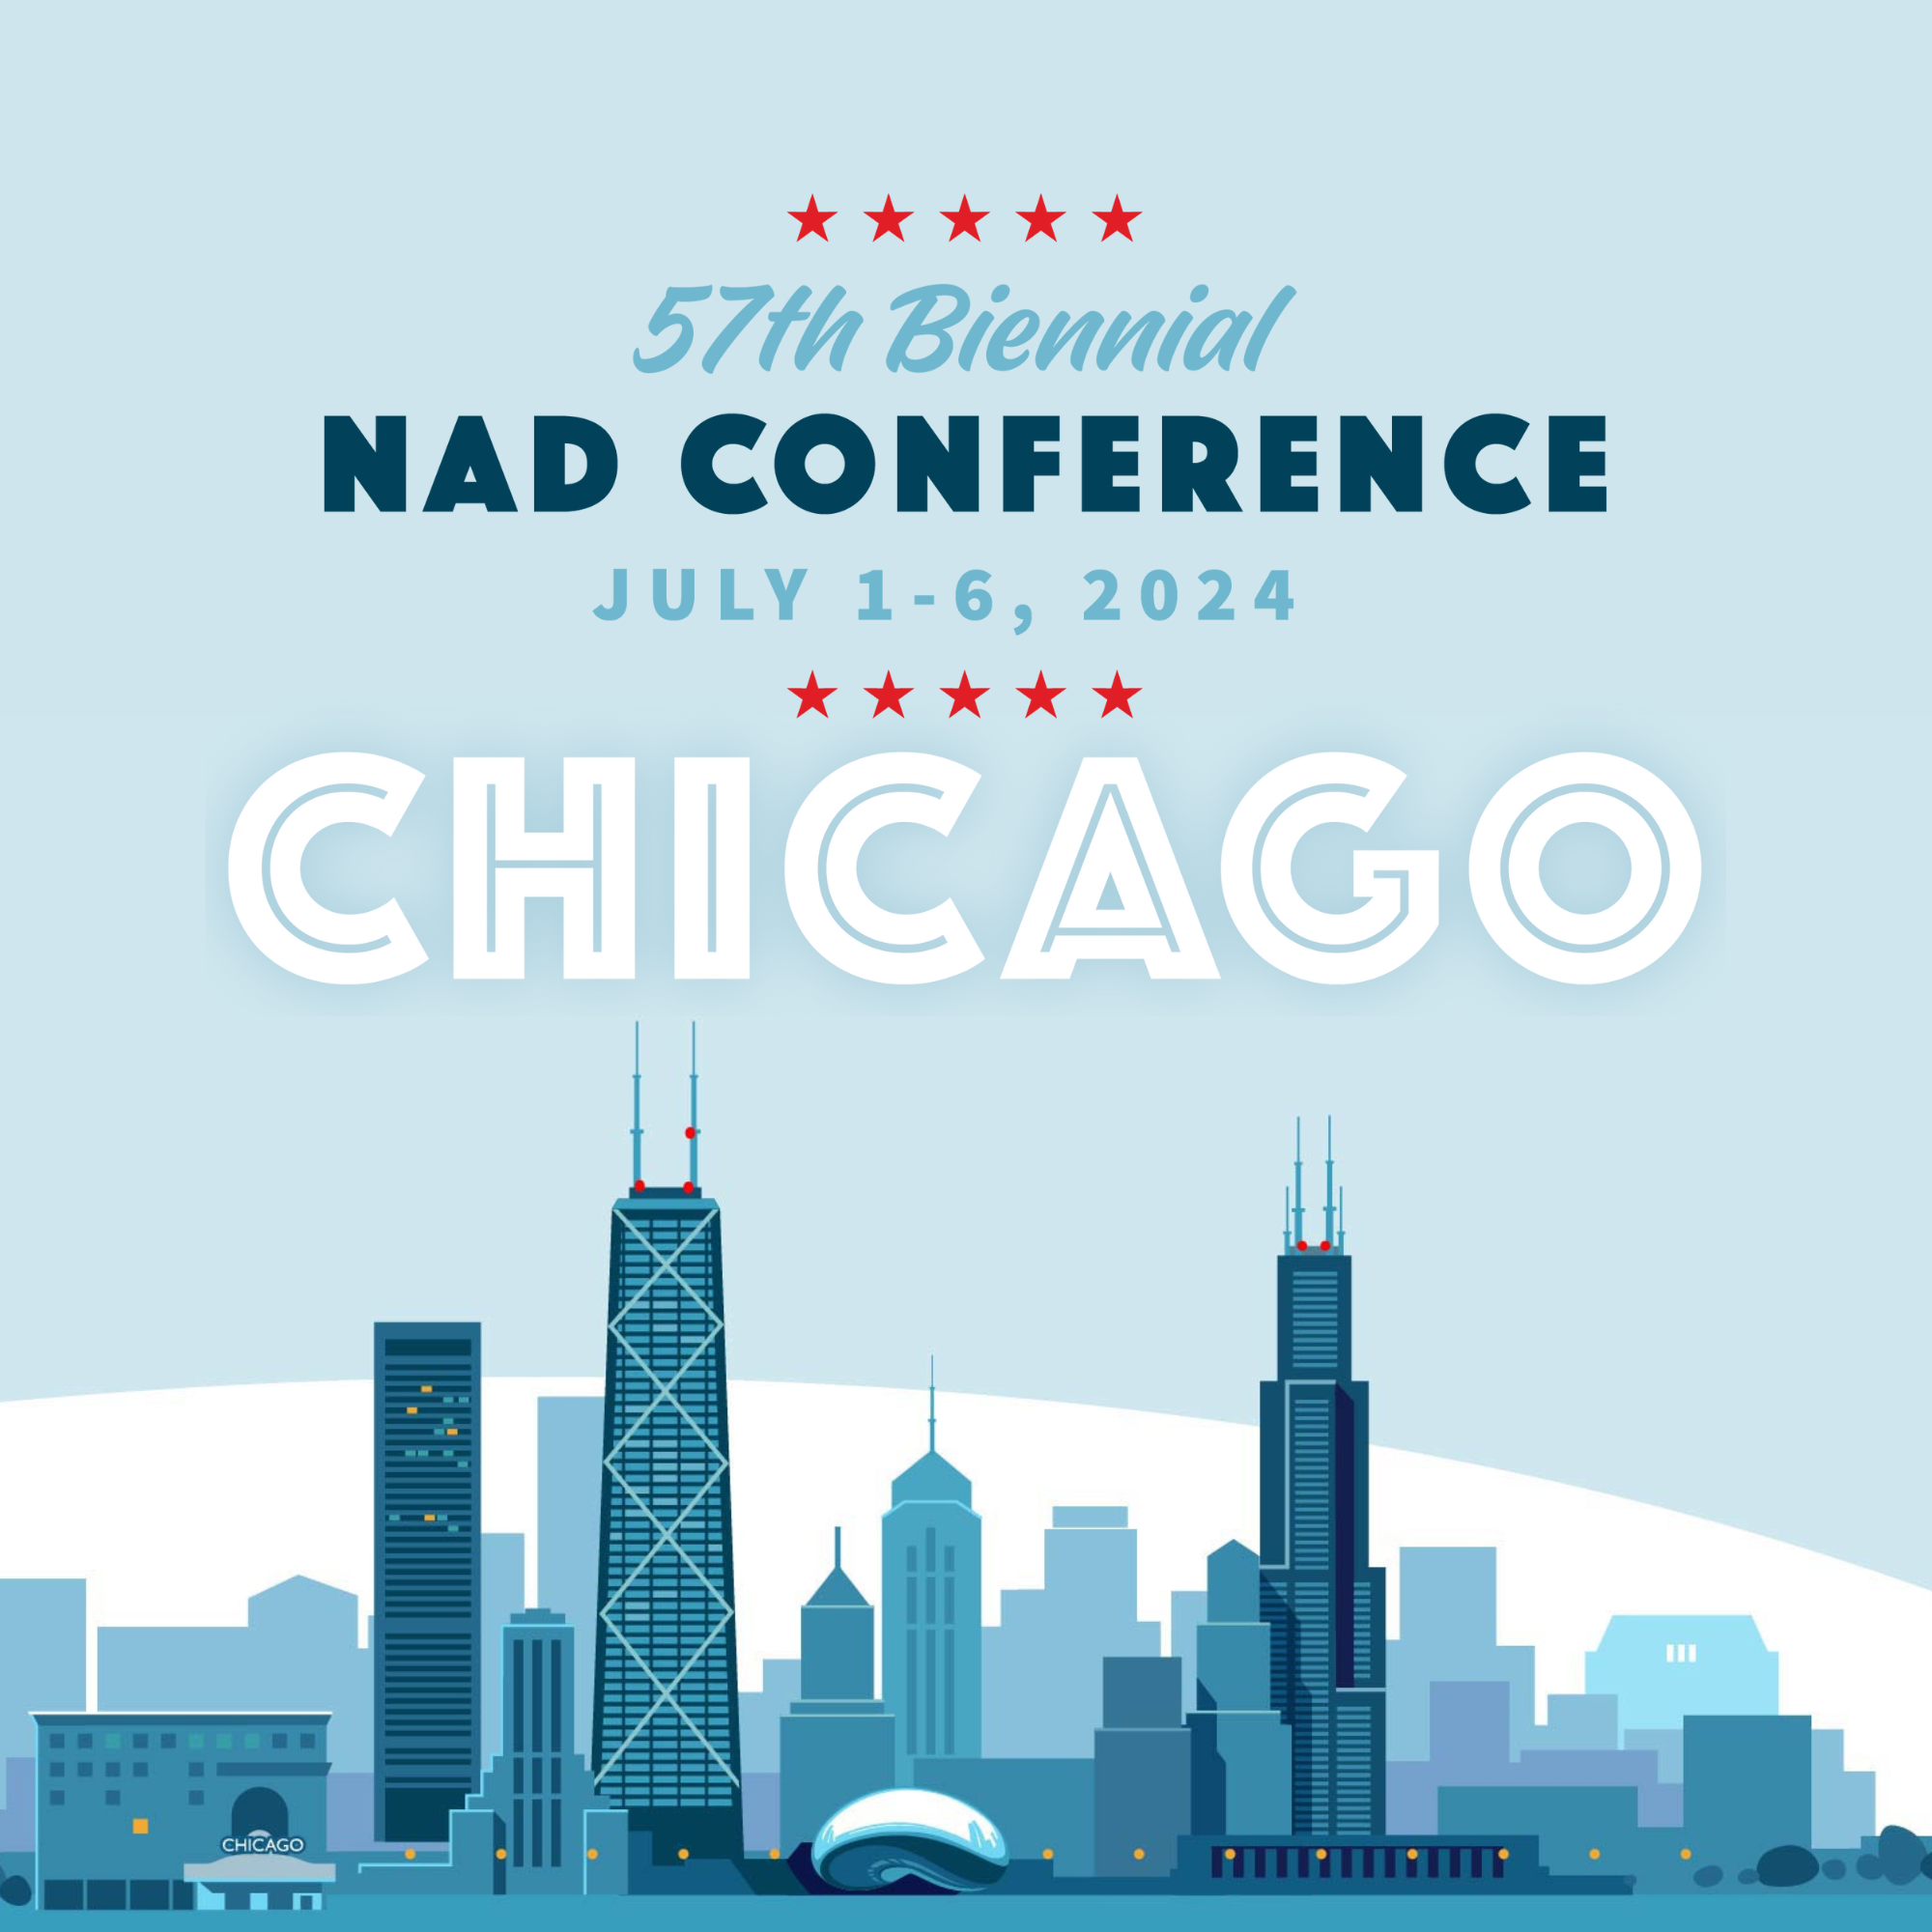 Poster of #2024 NAD Conference. Background is a drawing of Chicago's skyline including Sears Tower and John Hancock Tower along with Navy Pier. Text: 57th Biennial NAD Conference July 1-6, 2024 Chicago